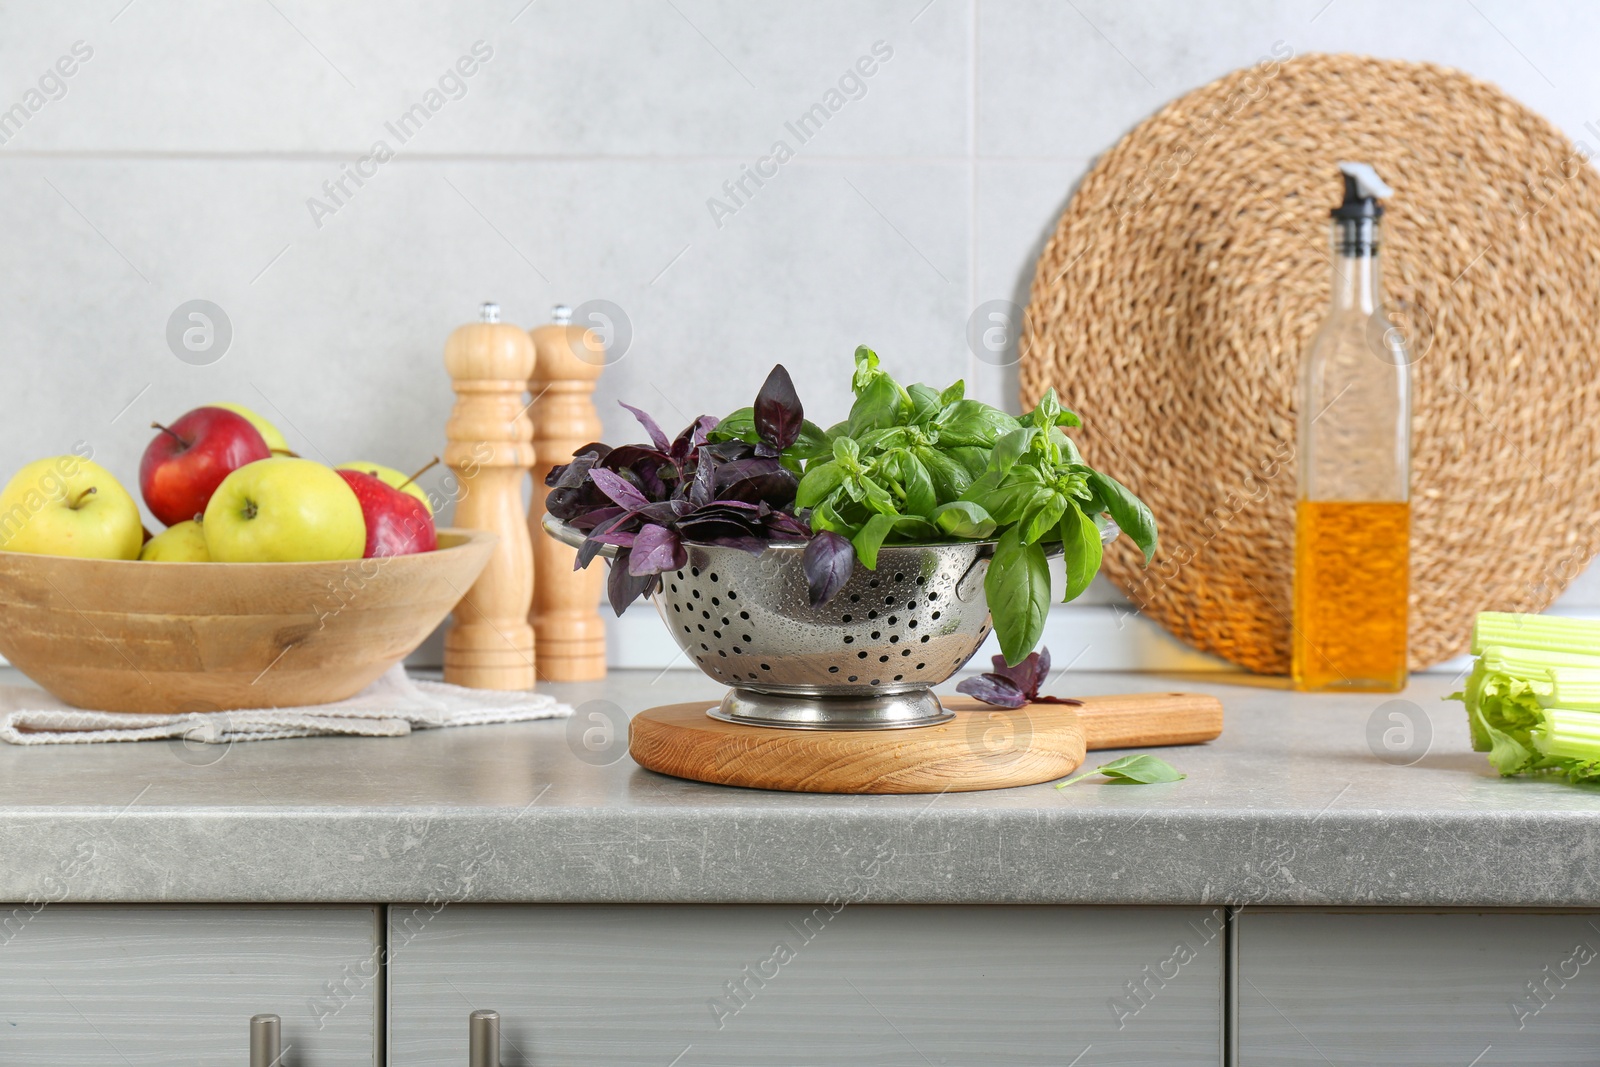 Photo of Metal colander with different fresh basil leaves and other products on grey countertop in kitchen